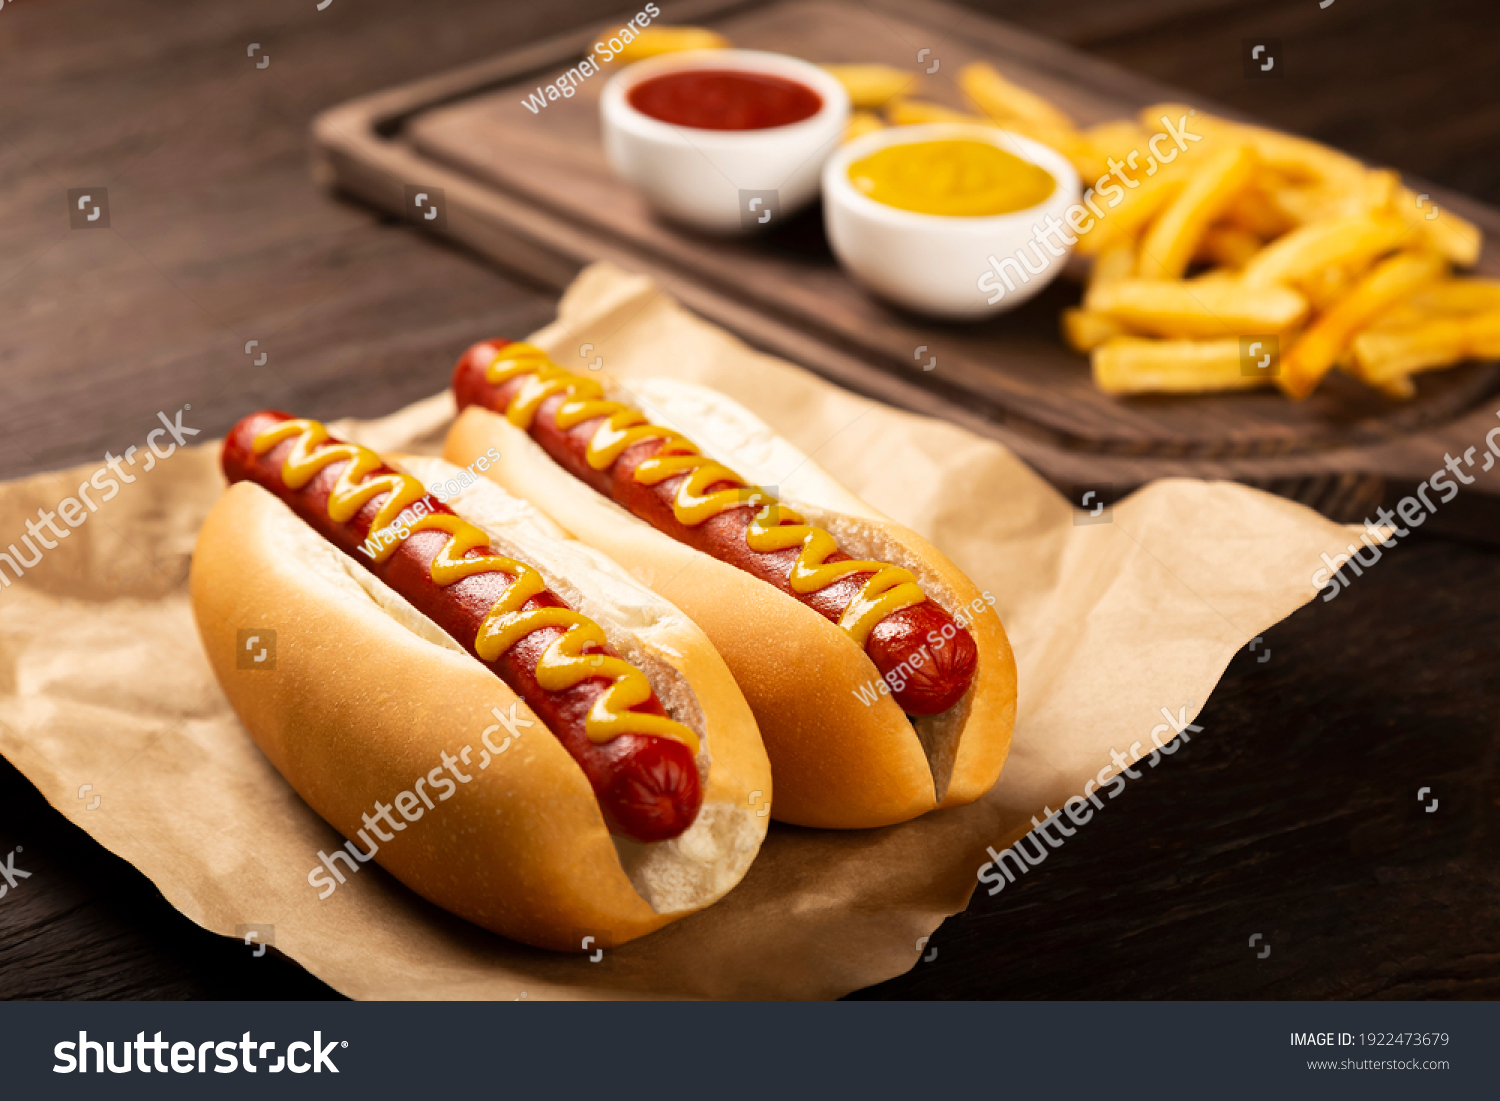 Hot dogs with ketchup, yellow mustard and fries. Image with selective focus #1922473679